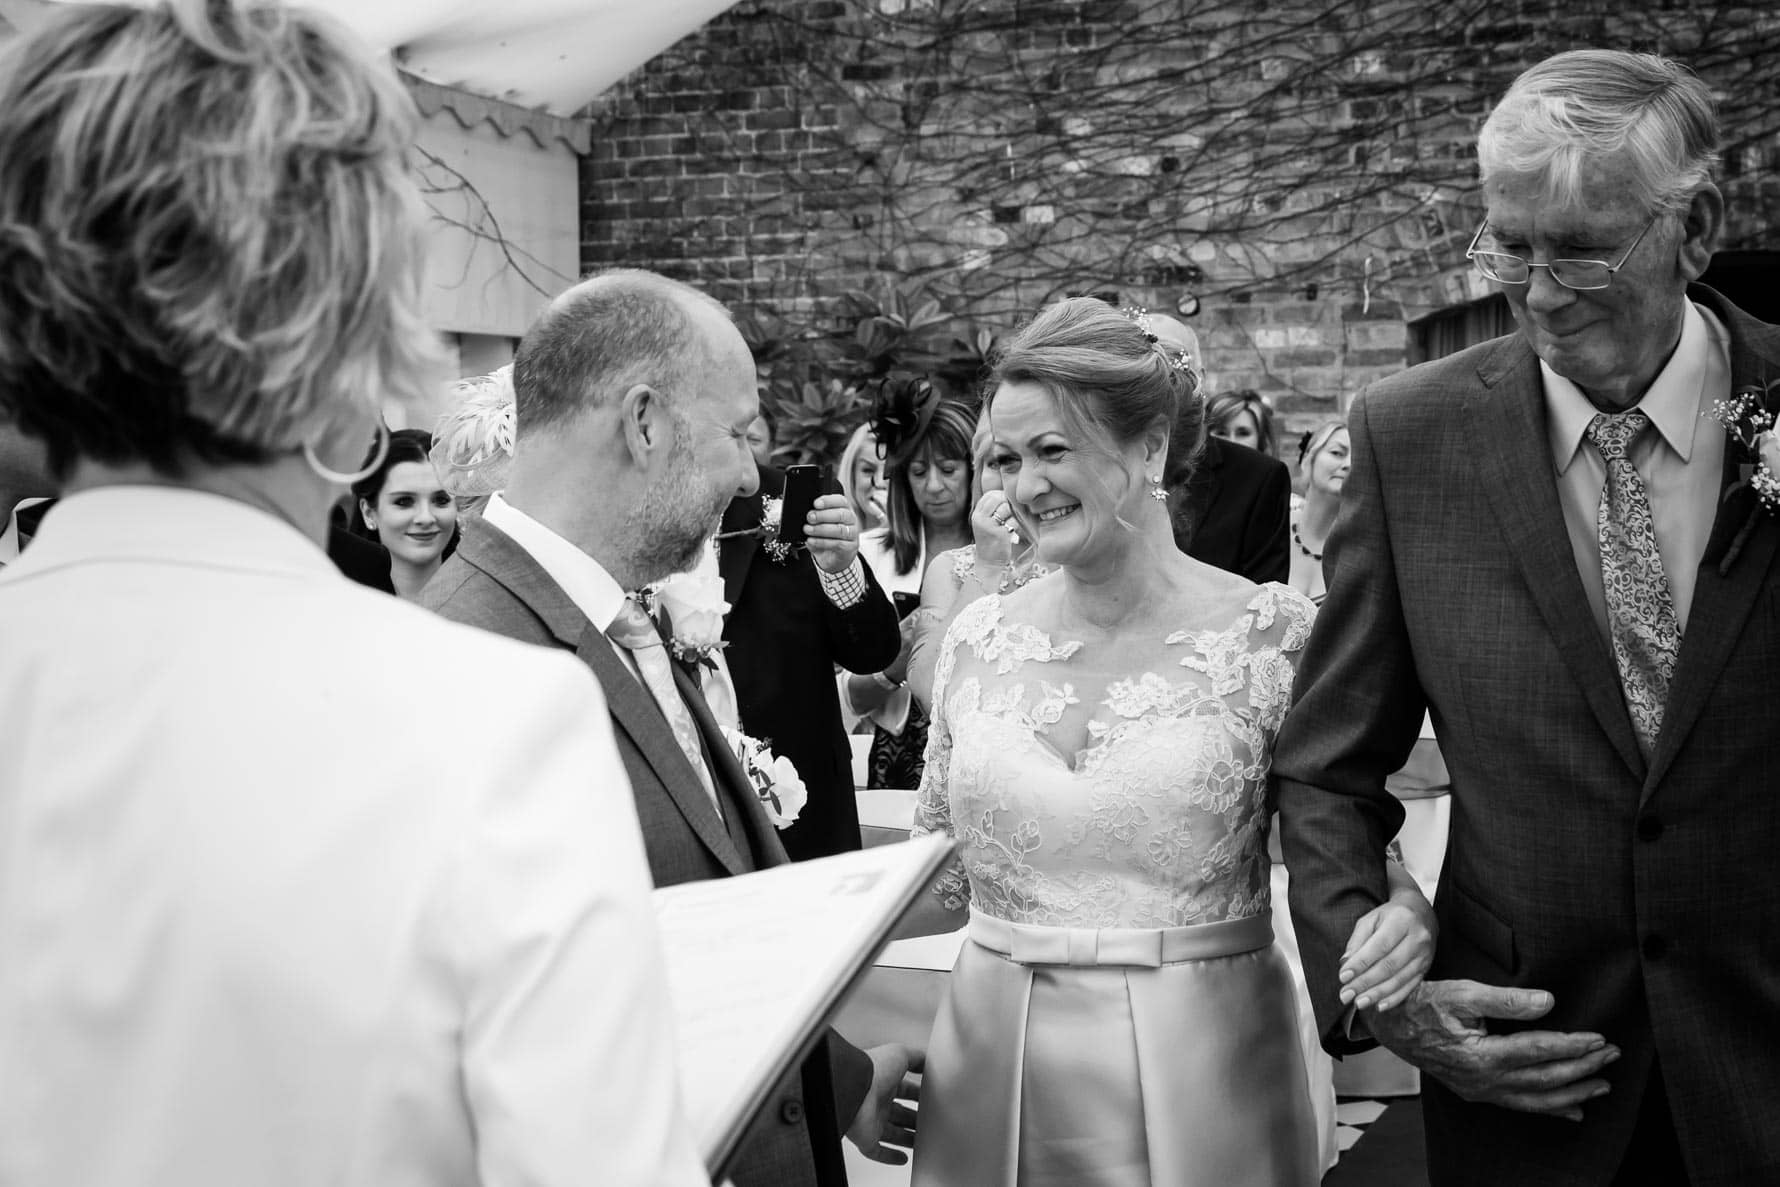 The groom greets his bride at their Hertfordshire wedding at Hanbury Manor